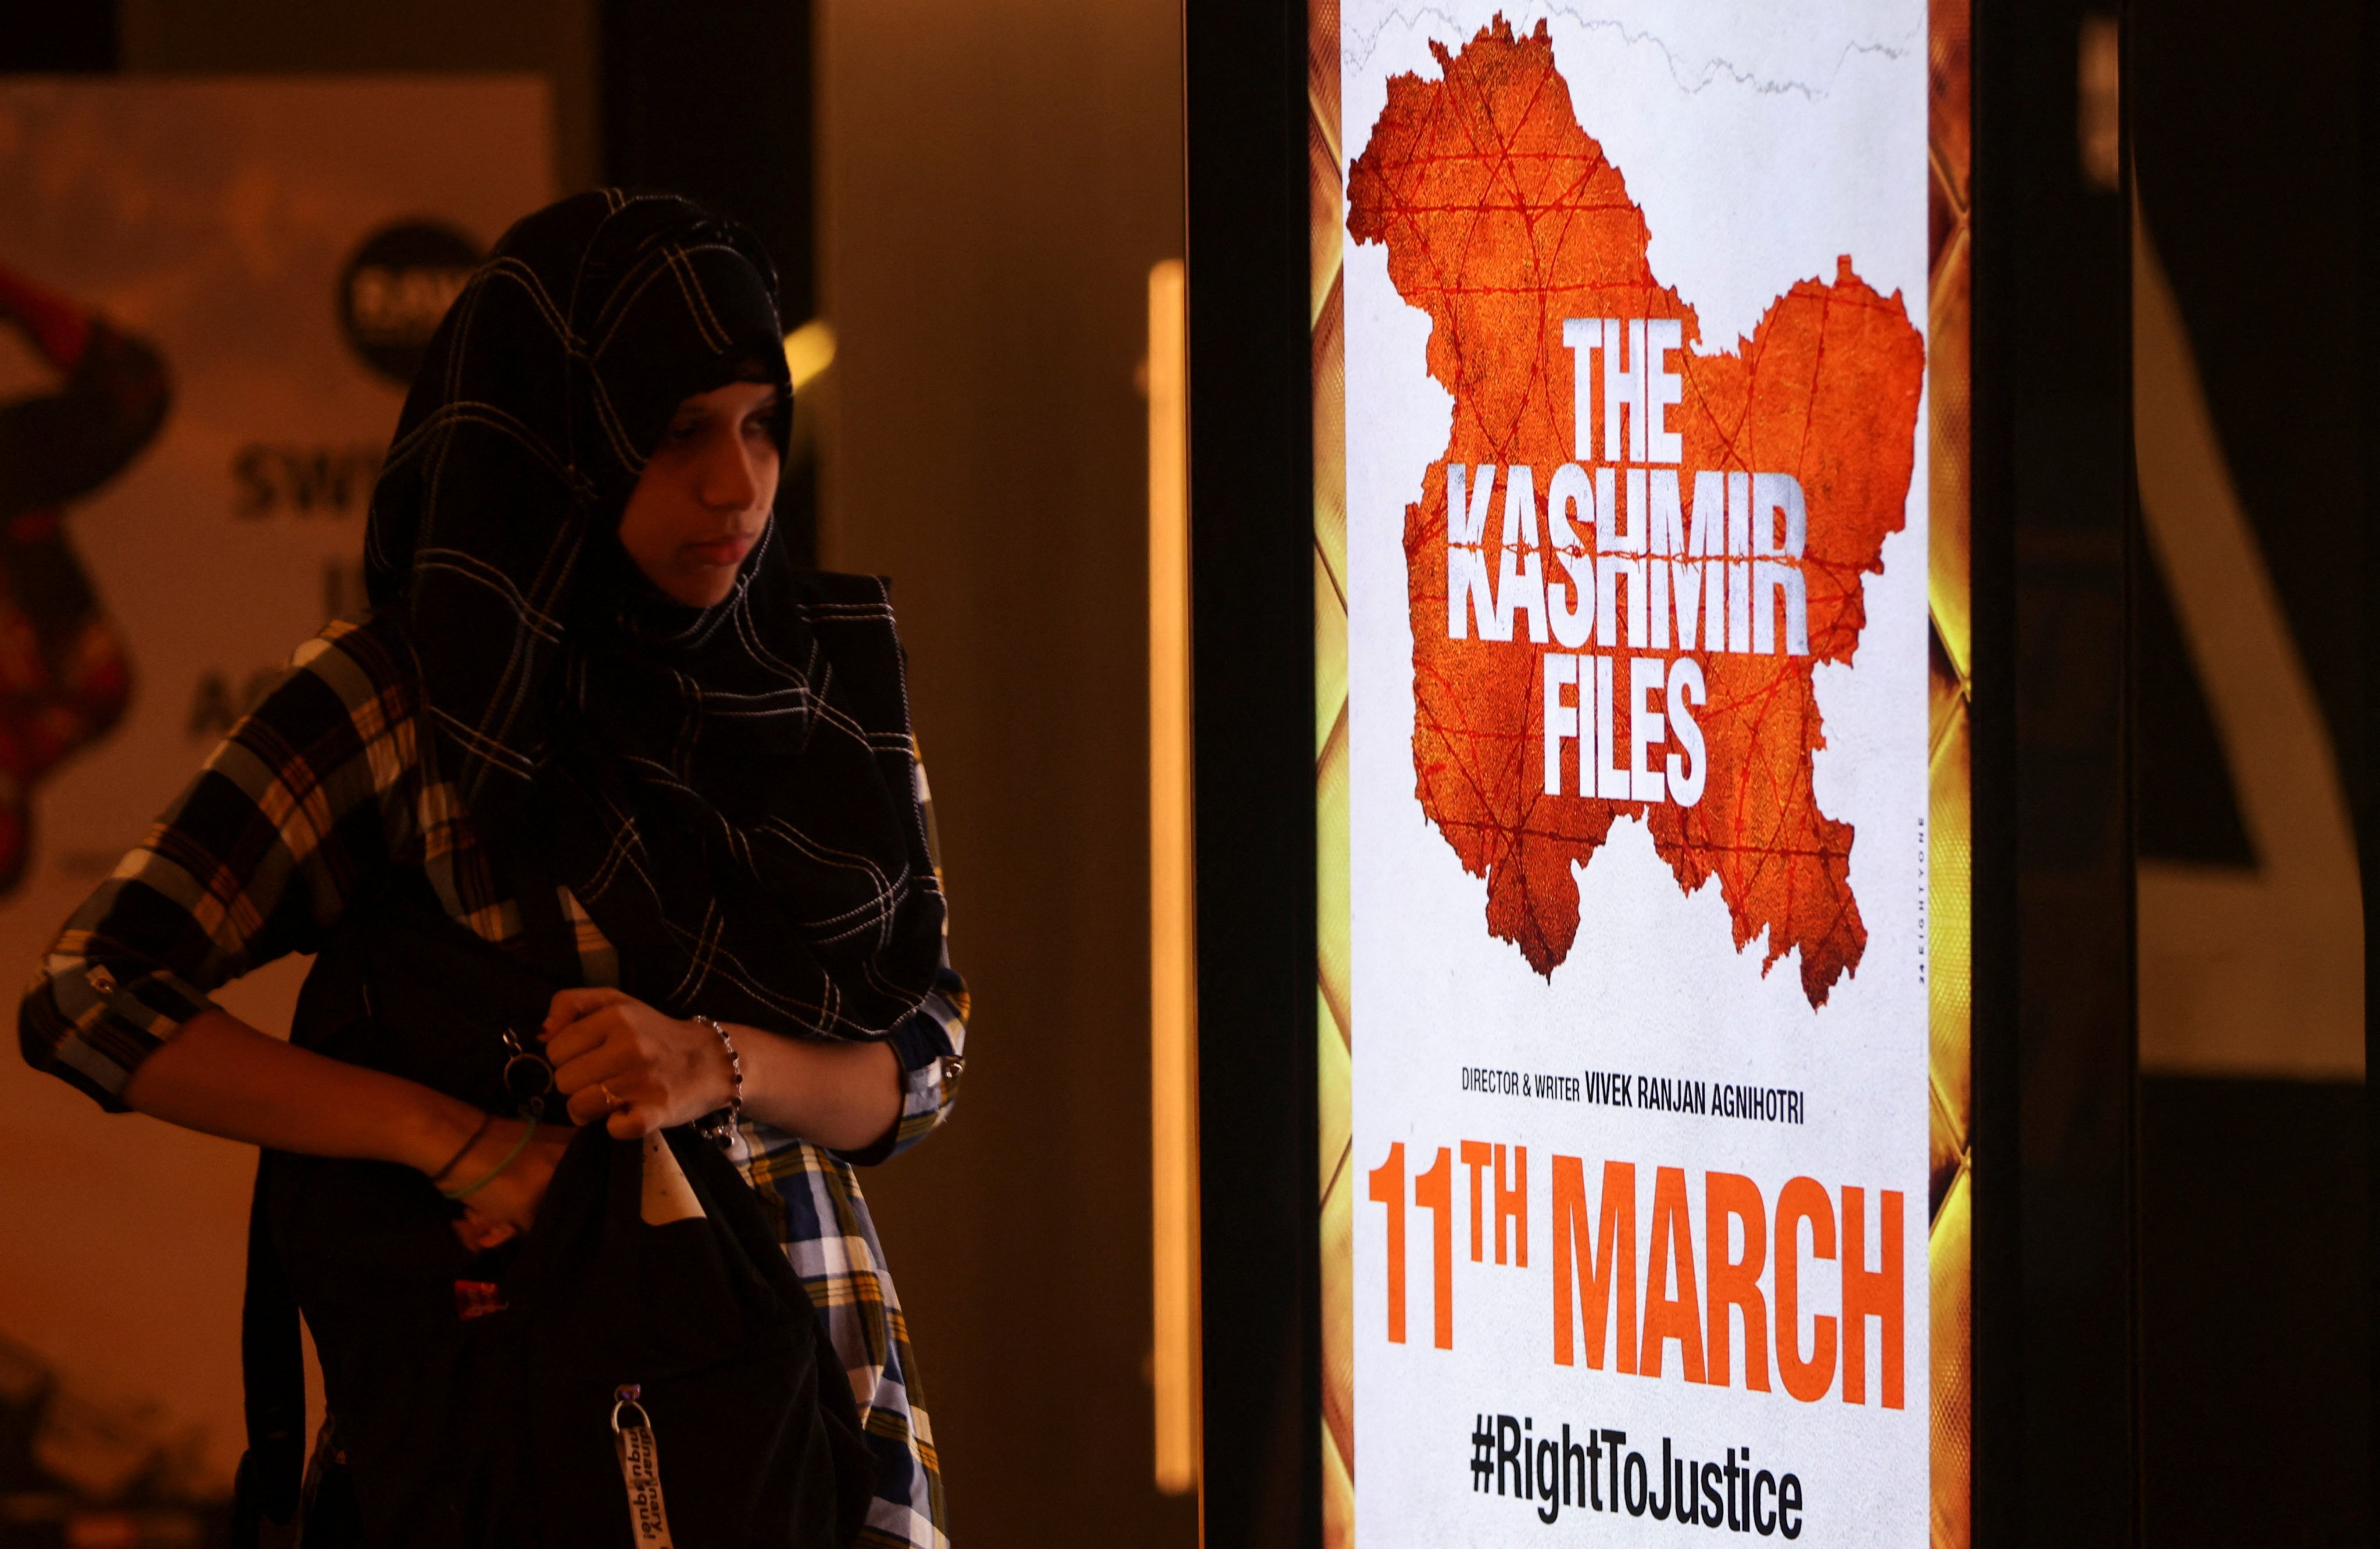 A woman walks past a poster for “The Kashmir Files” inside a cinema in Mumbai last week. Photo: Reuters